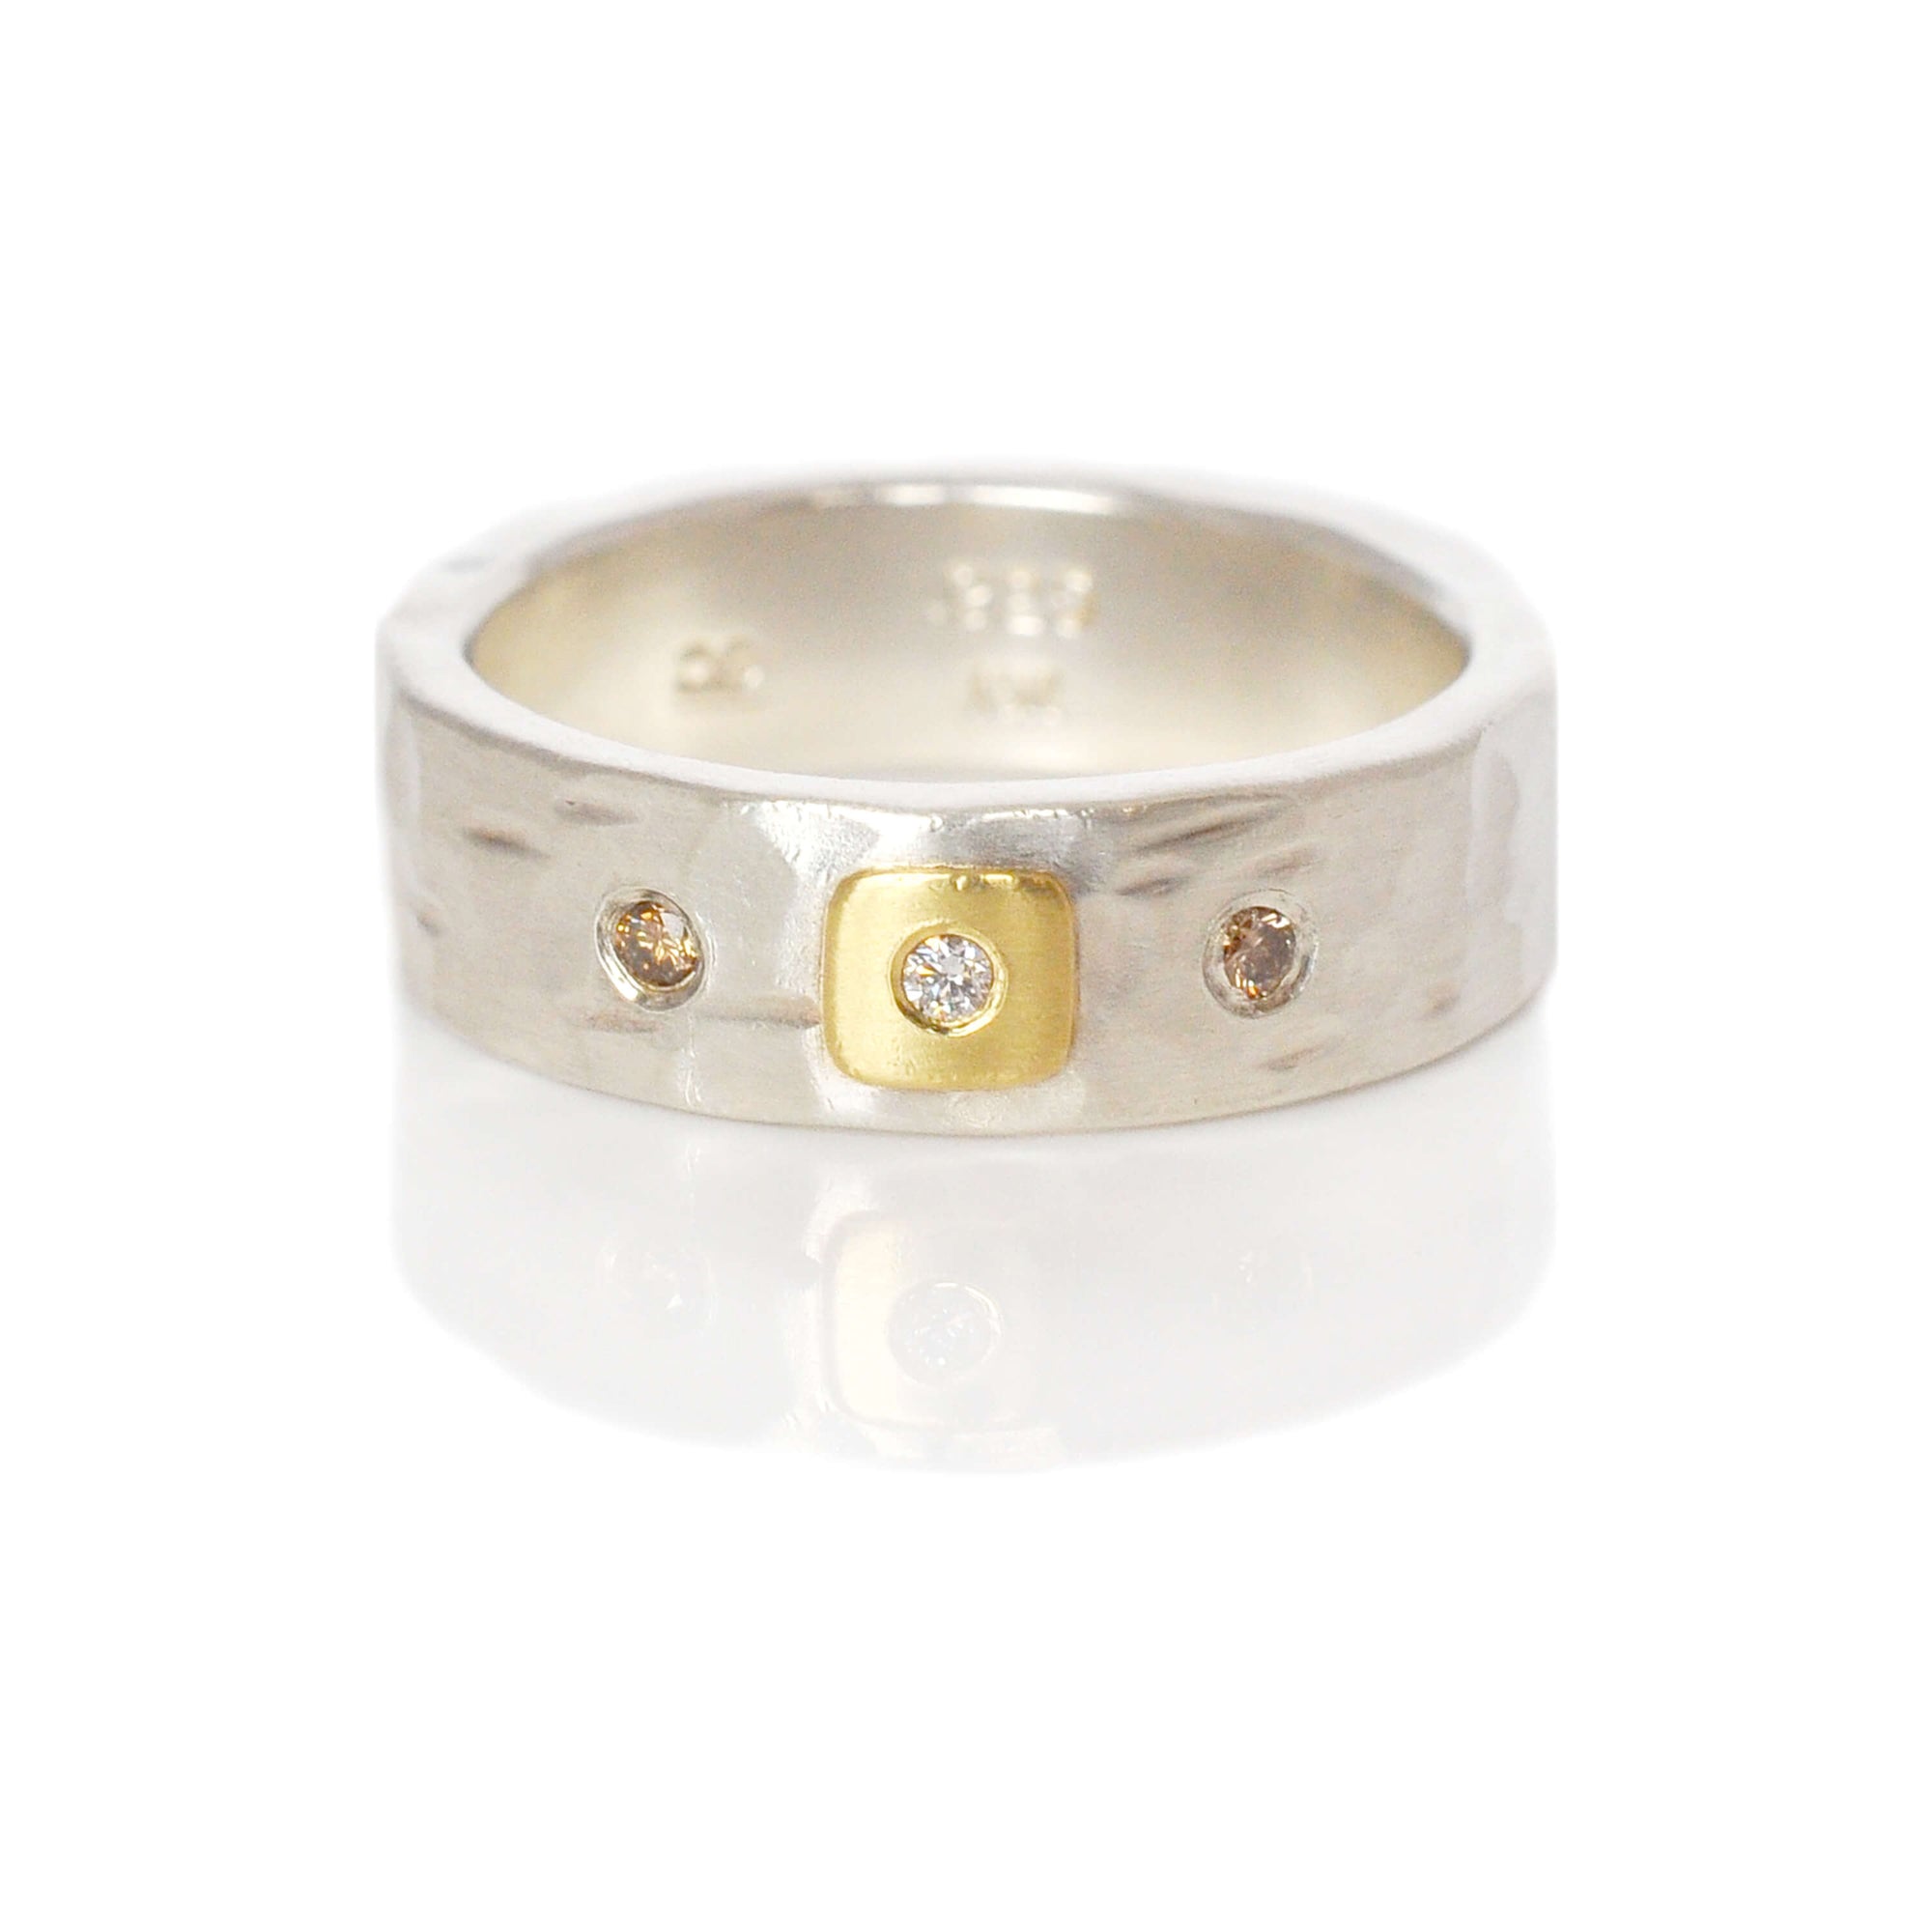 Sterling silver hammered band with yellow gold and diamond accents. Handmade by EC Design Jewelry in Minneapolis, MN.